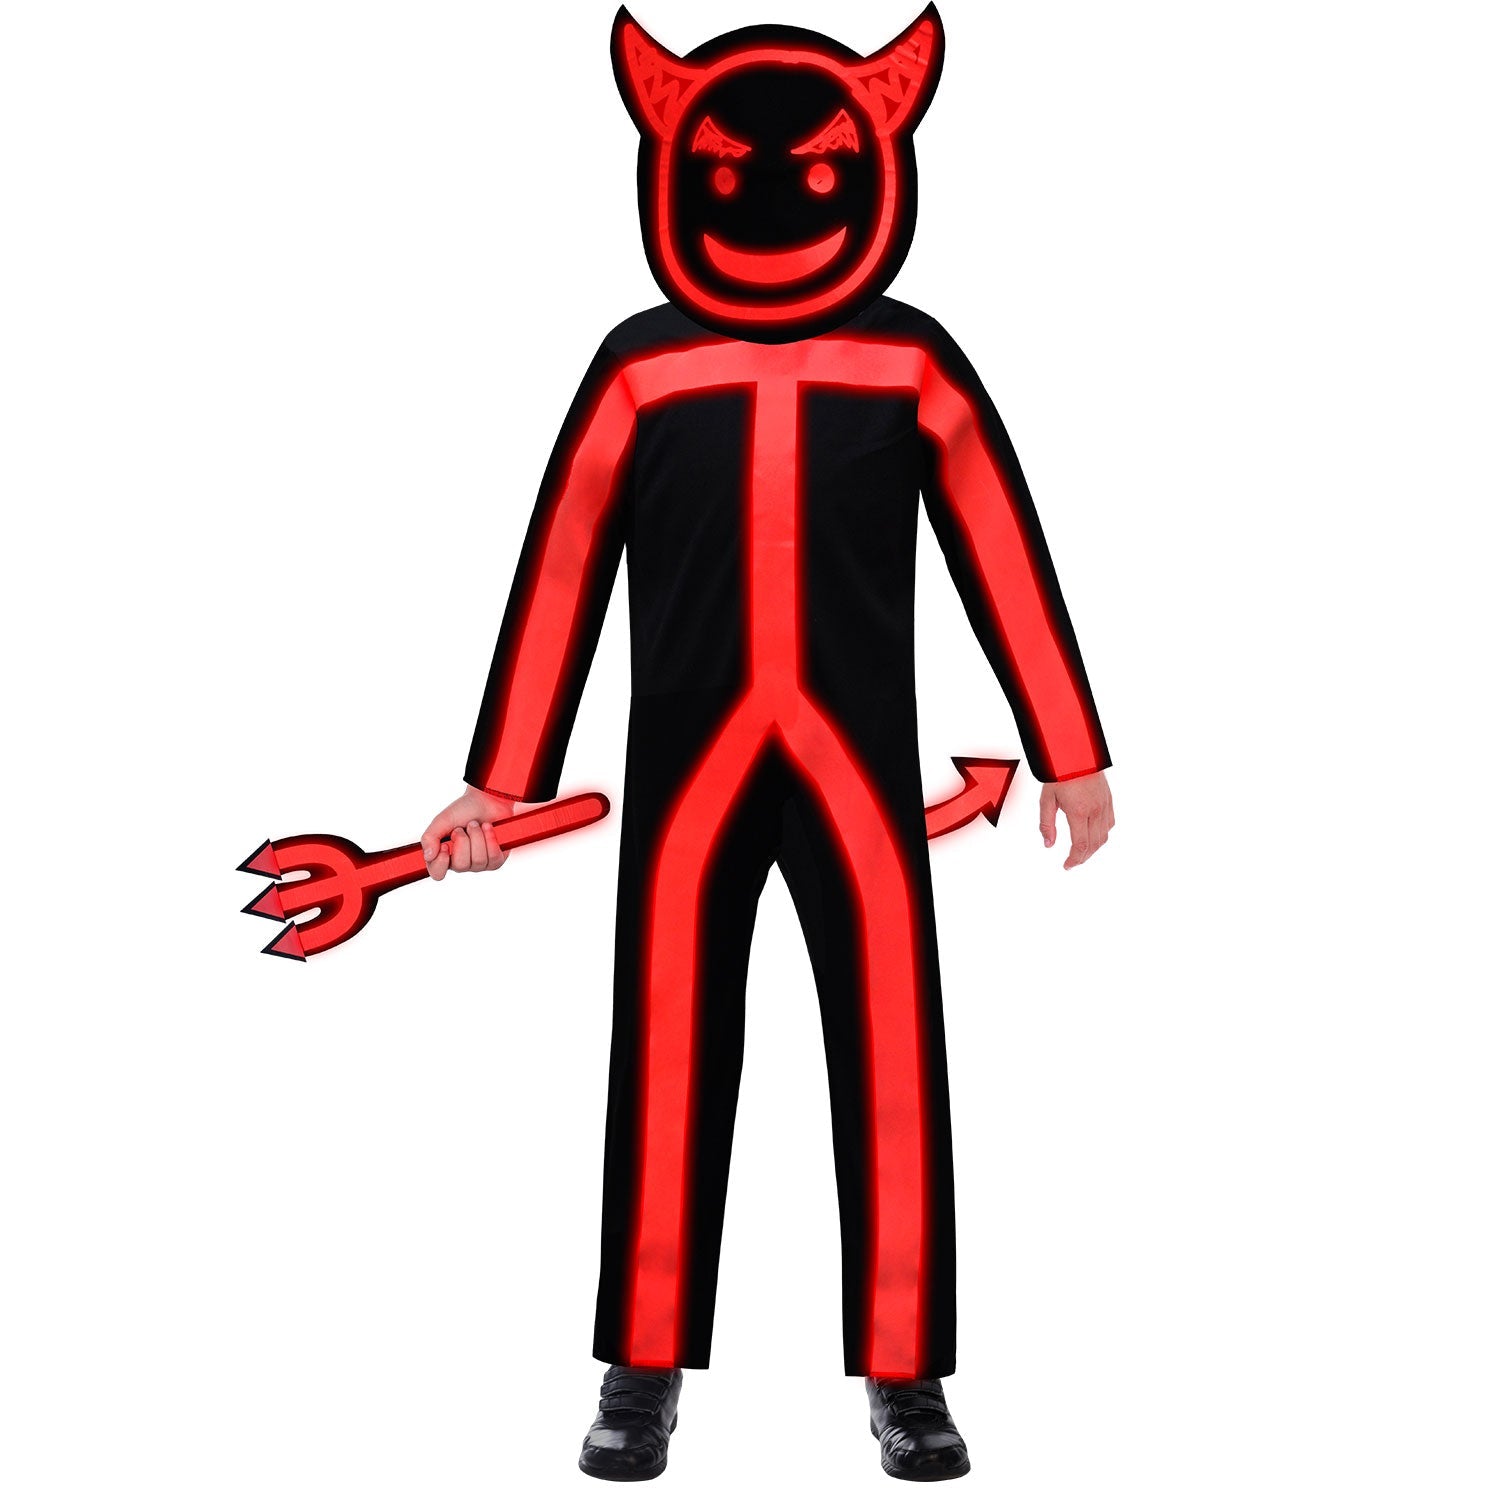 Glow in the Dark Stick Devil Costume includes jumpsuit, mask, tail and trident